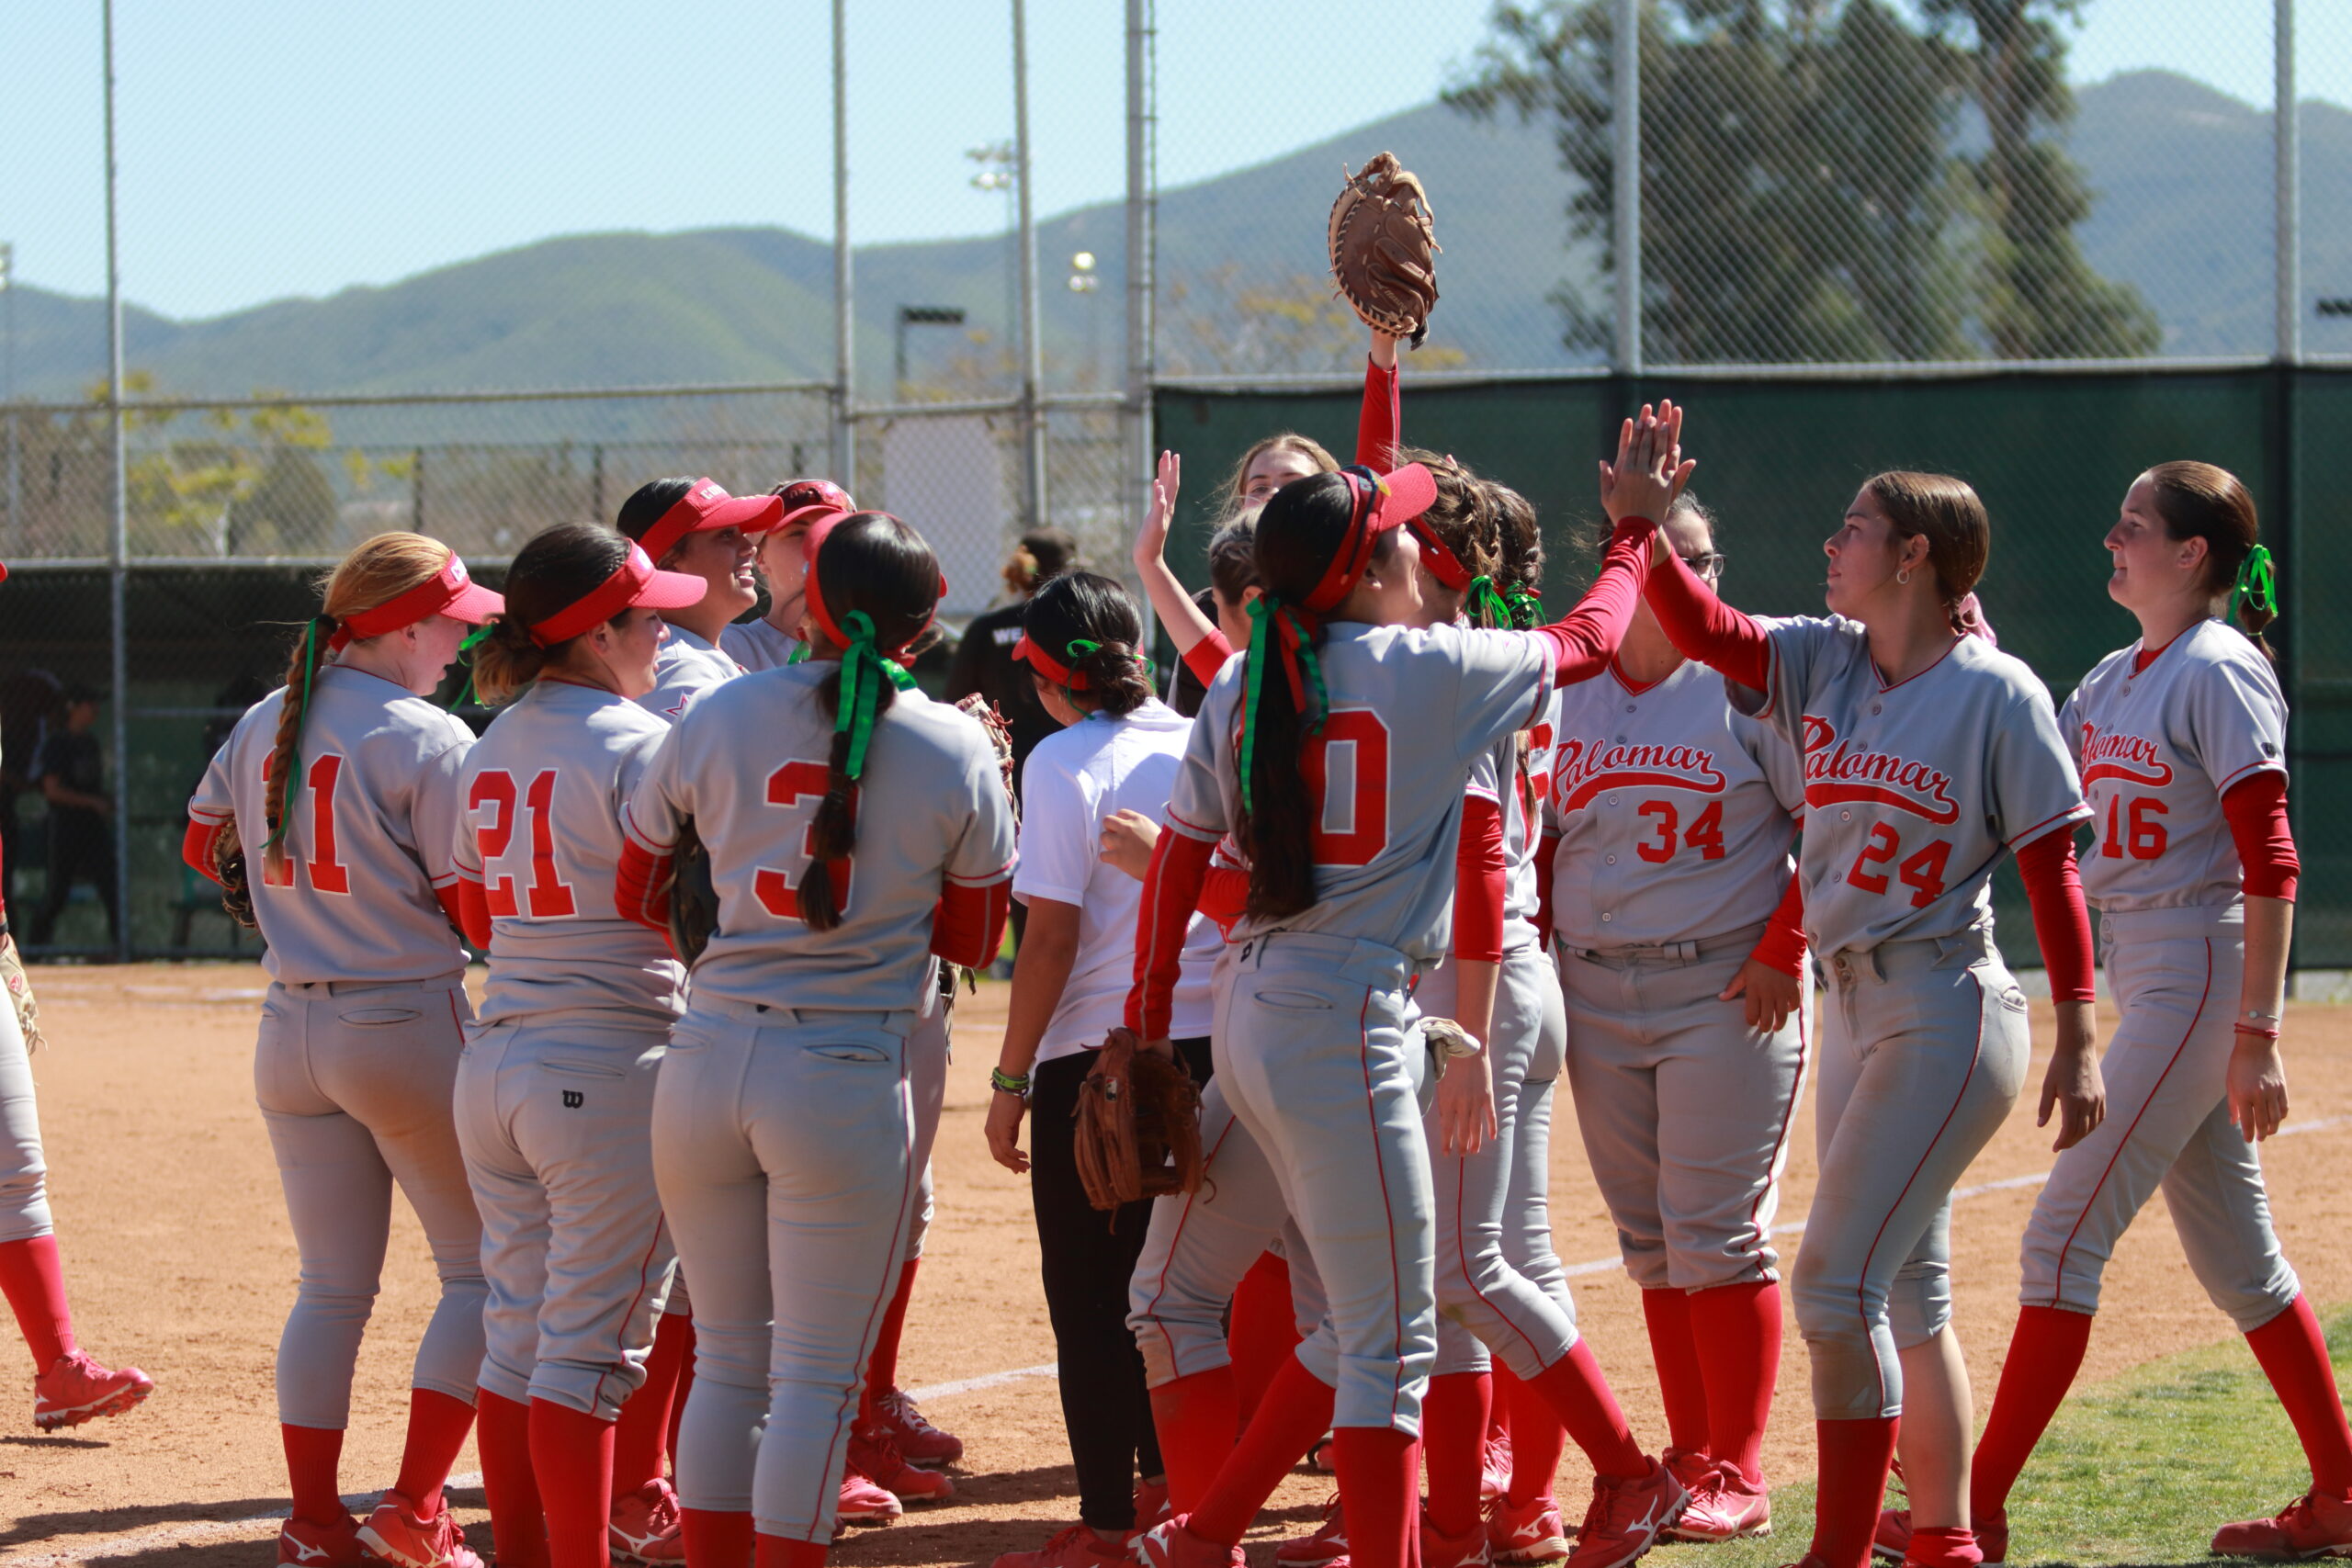 A group of female softball players gather around each other after a game in a field. Two of them give each other a high-five.